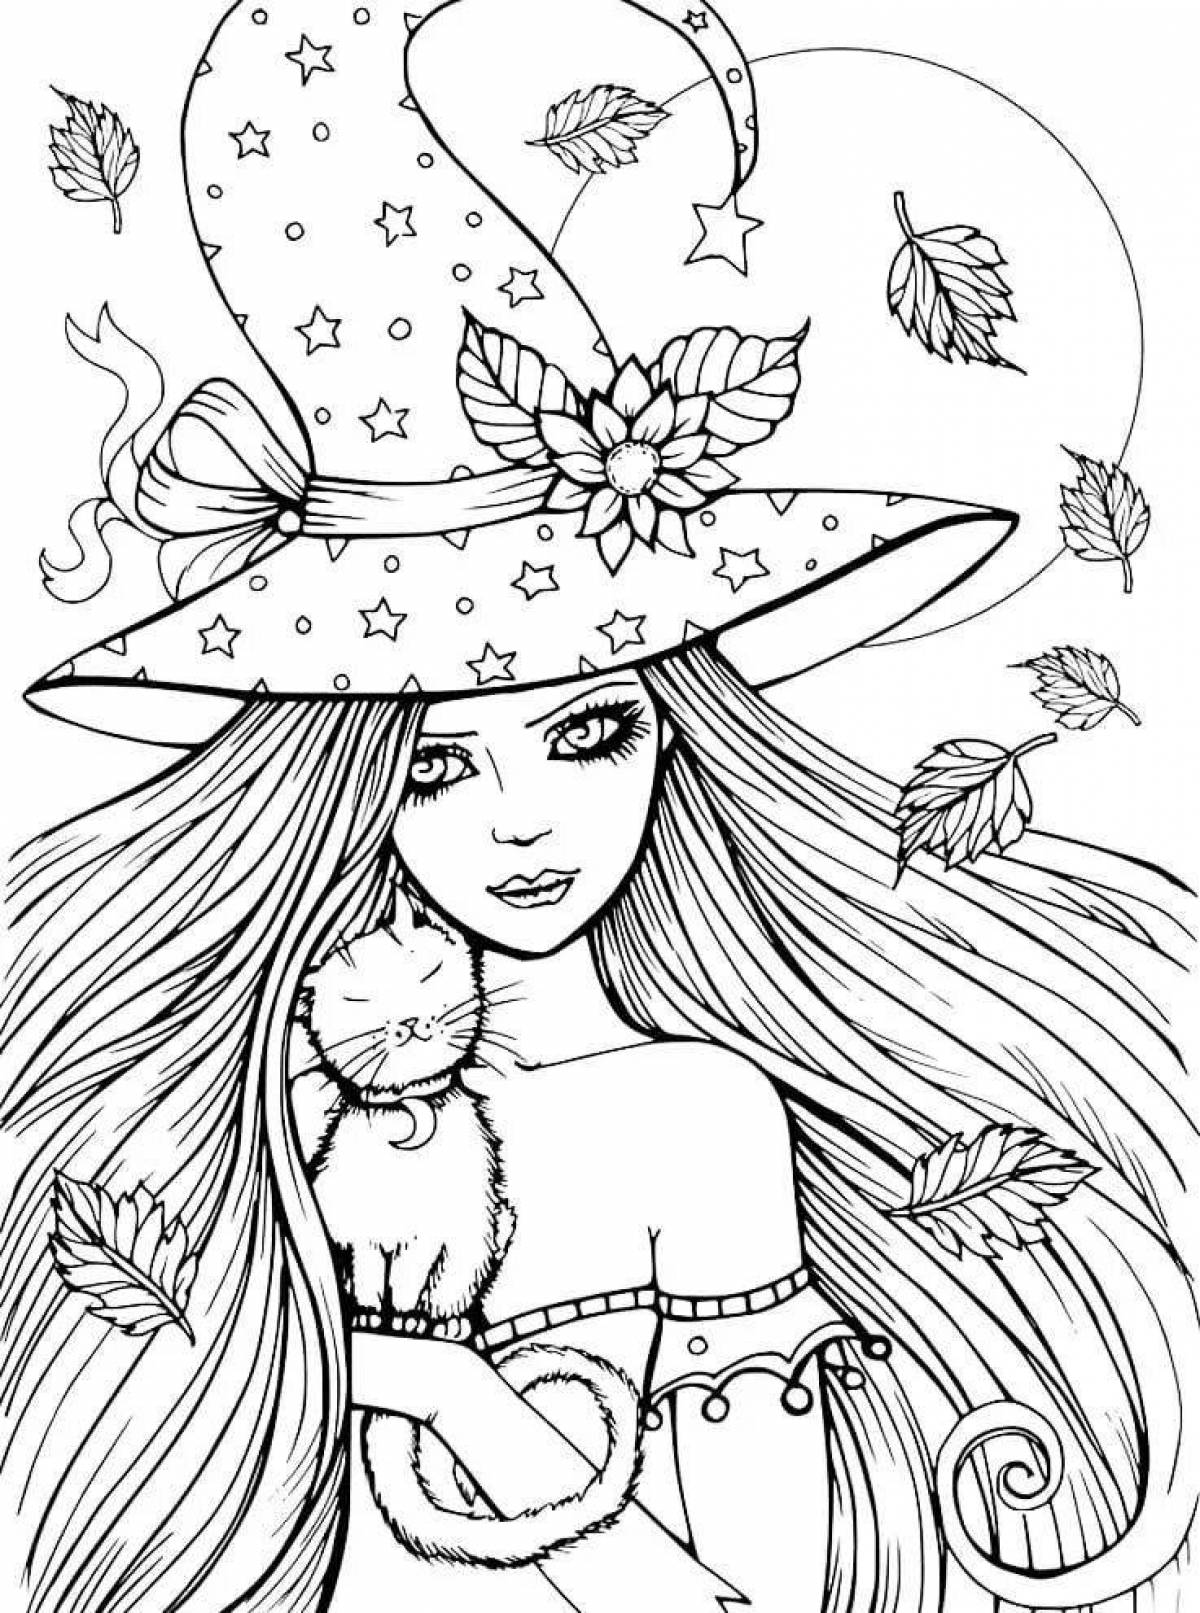 Delightful coloring book for girls 9 years old